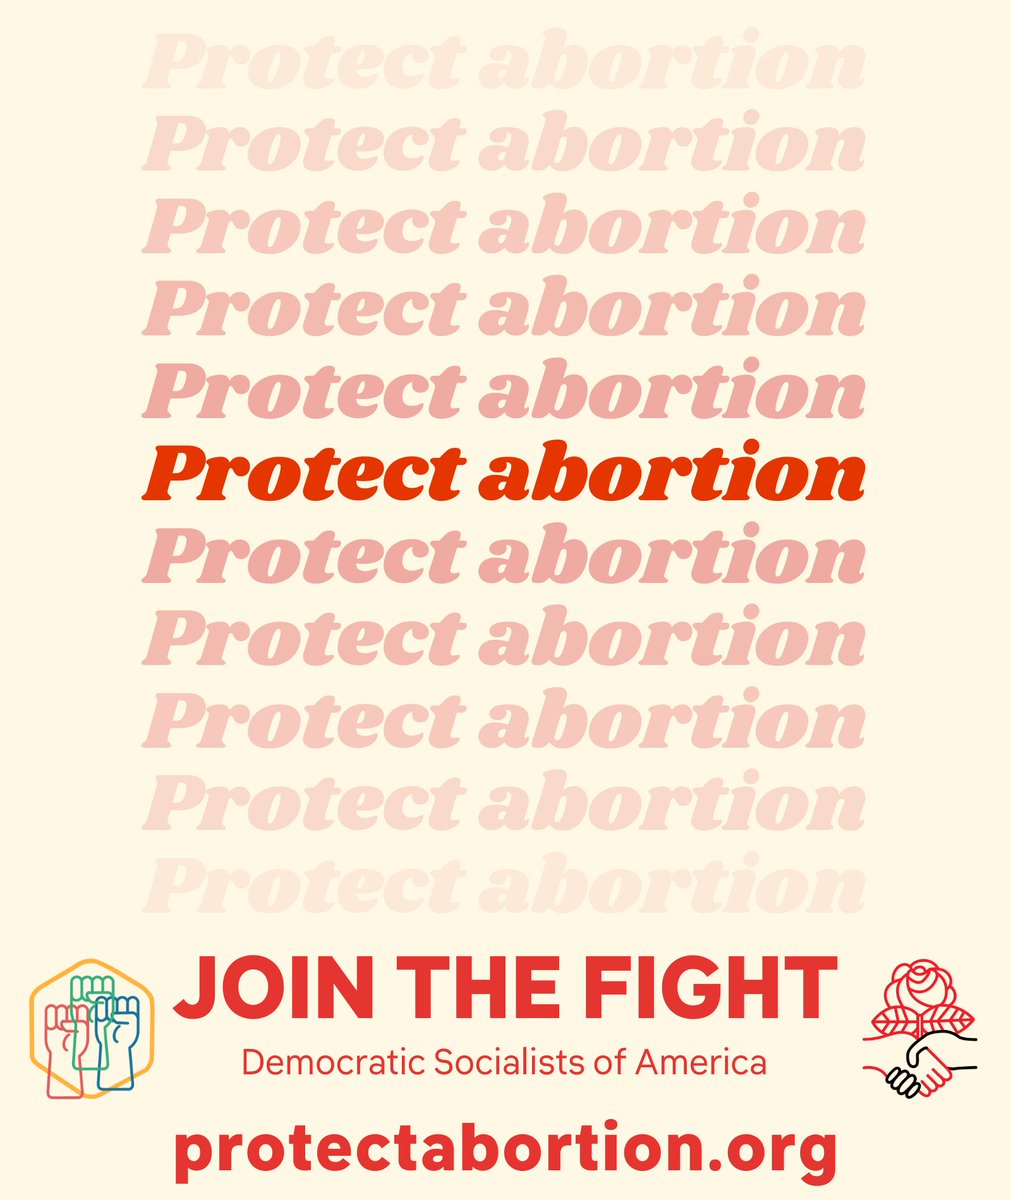 The Supreme Court has overturned Roe v. Wade. This cannot stand. The time to hit the streets is now. We must mobilize against this violent attack on abortion rights! Join the Bans Off Our Bodies rally and march in Amarillo TONIGHT, June 24 at 7pm downtown at 620 S Taylor St.